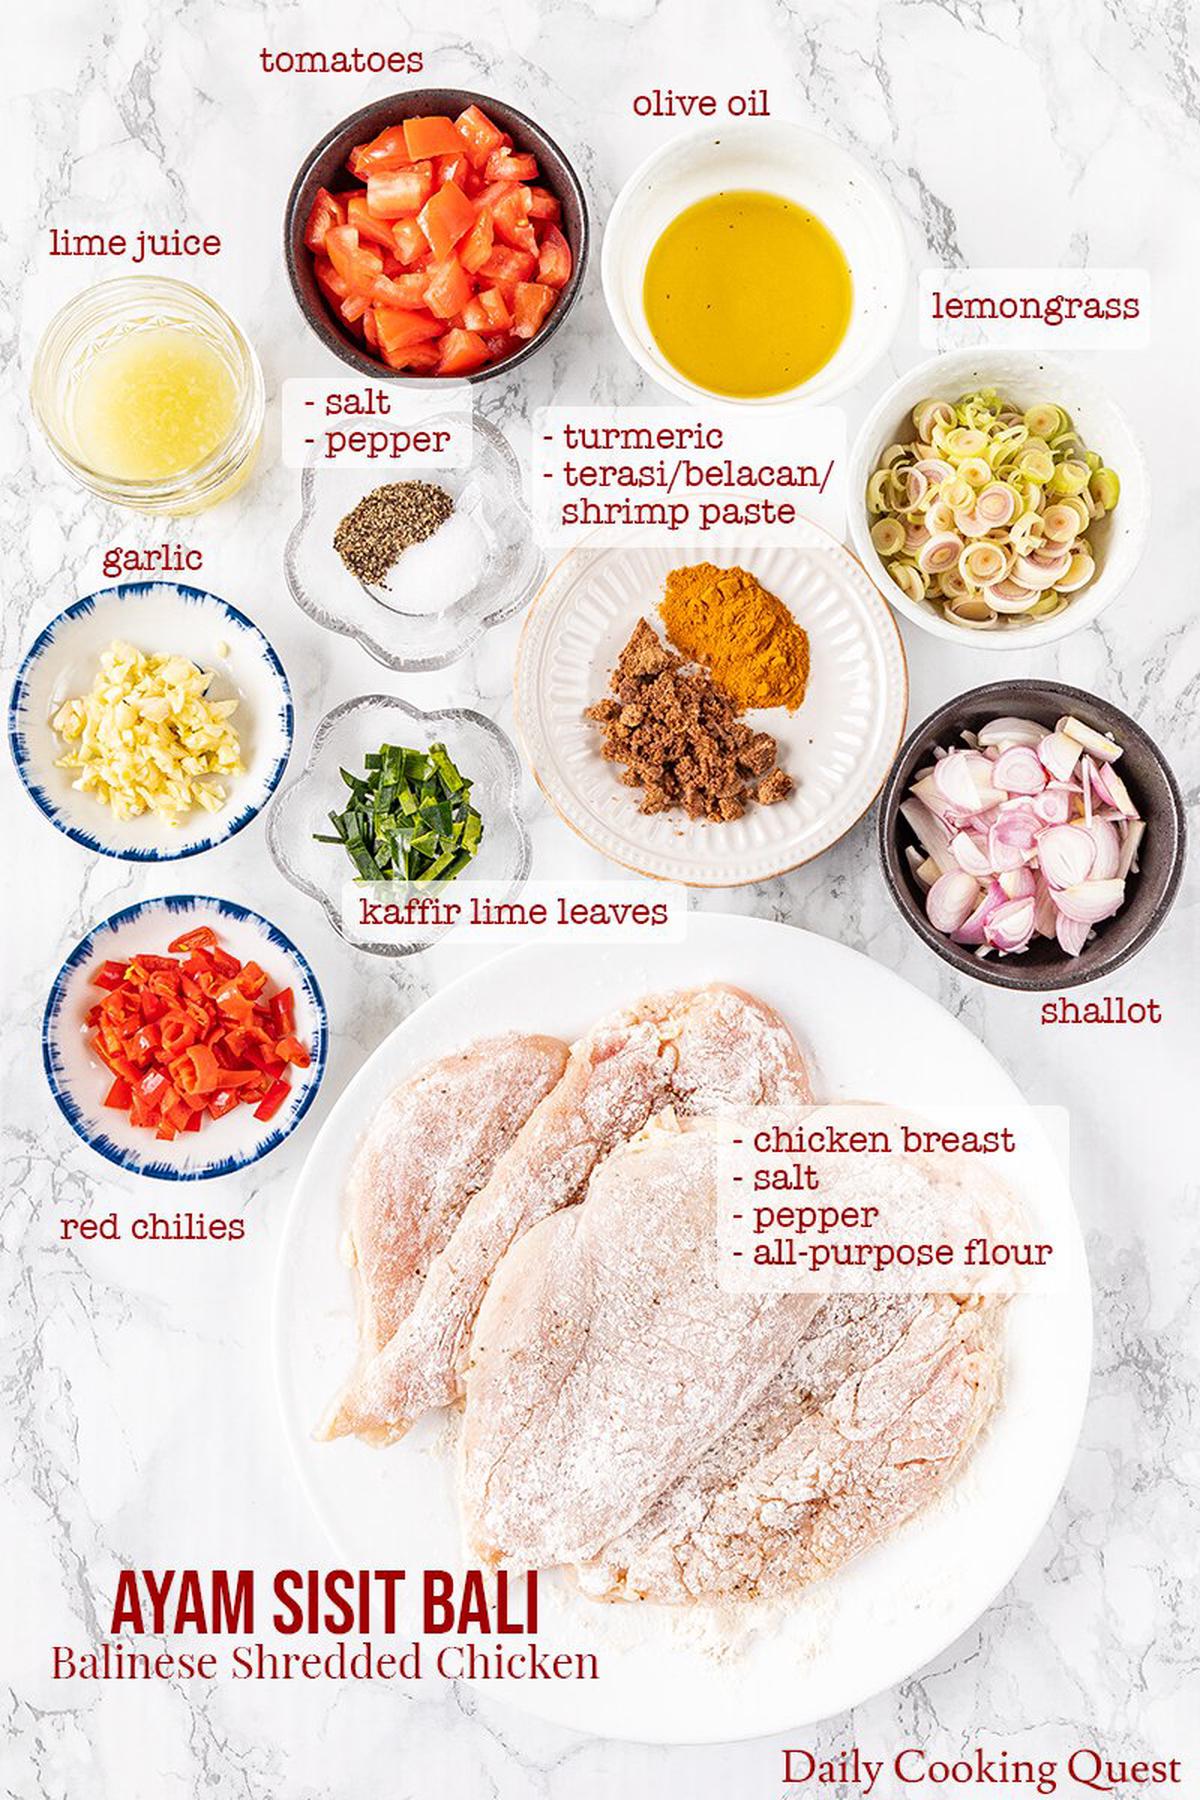 Ingredients for ayam sisit Bali (Balinese shredded chicken): chicken breast, salt, pepper, all-purpose flour, olive oil, shallot, garlic, red chilies, lemongrass, tomatoes, kaffir lime leaves, lime juice, turmeric, and terasi/belacan/shrimp paste.